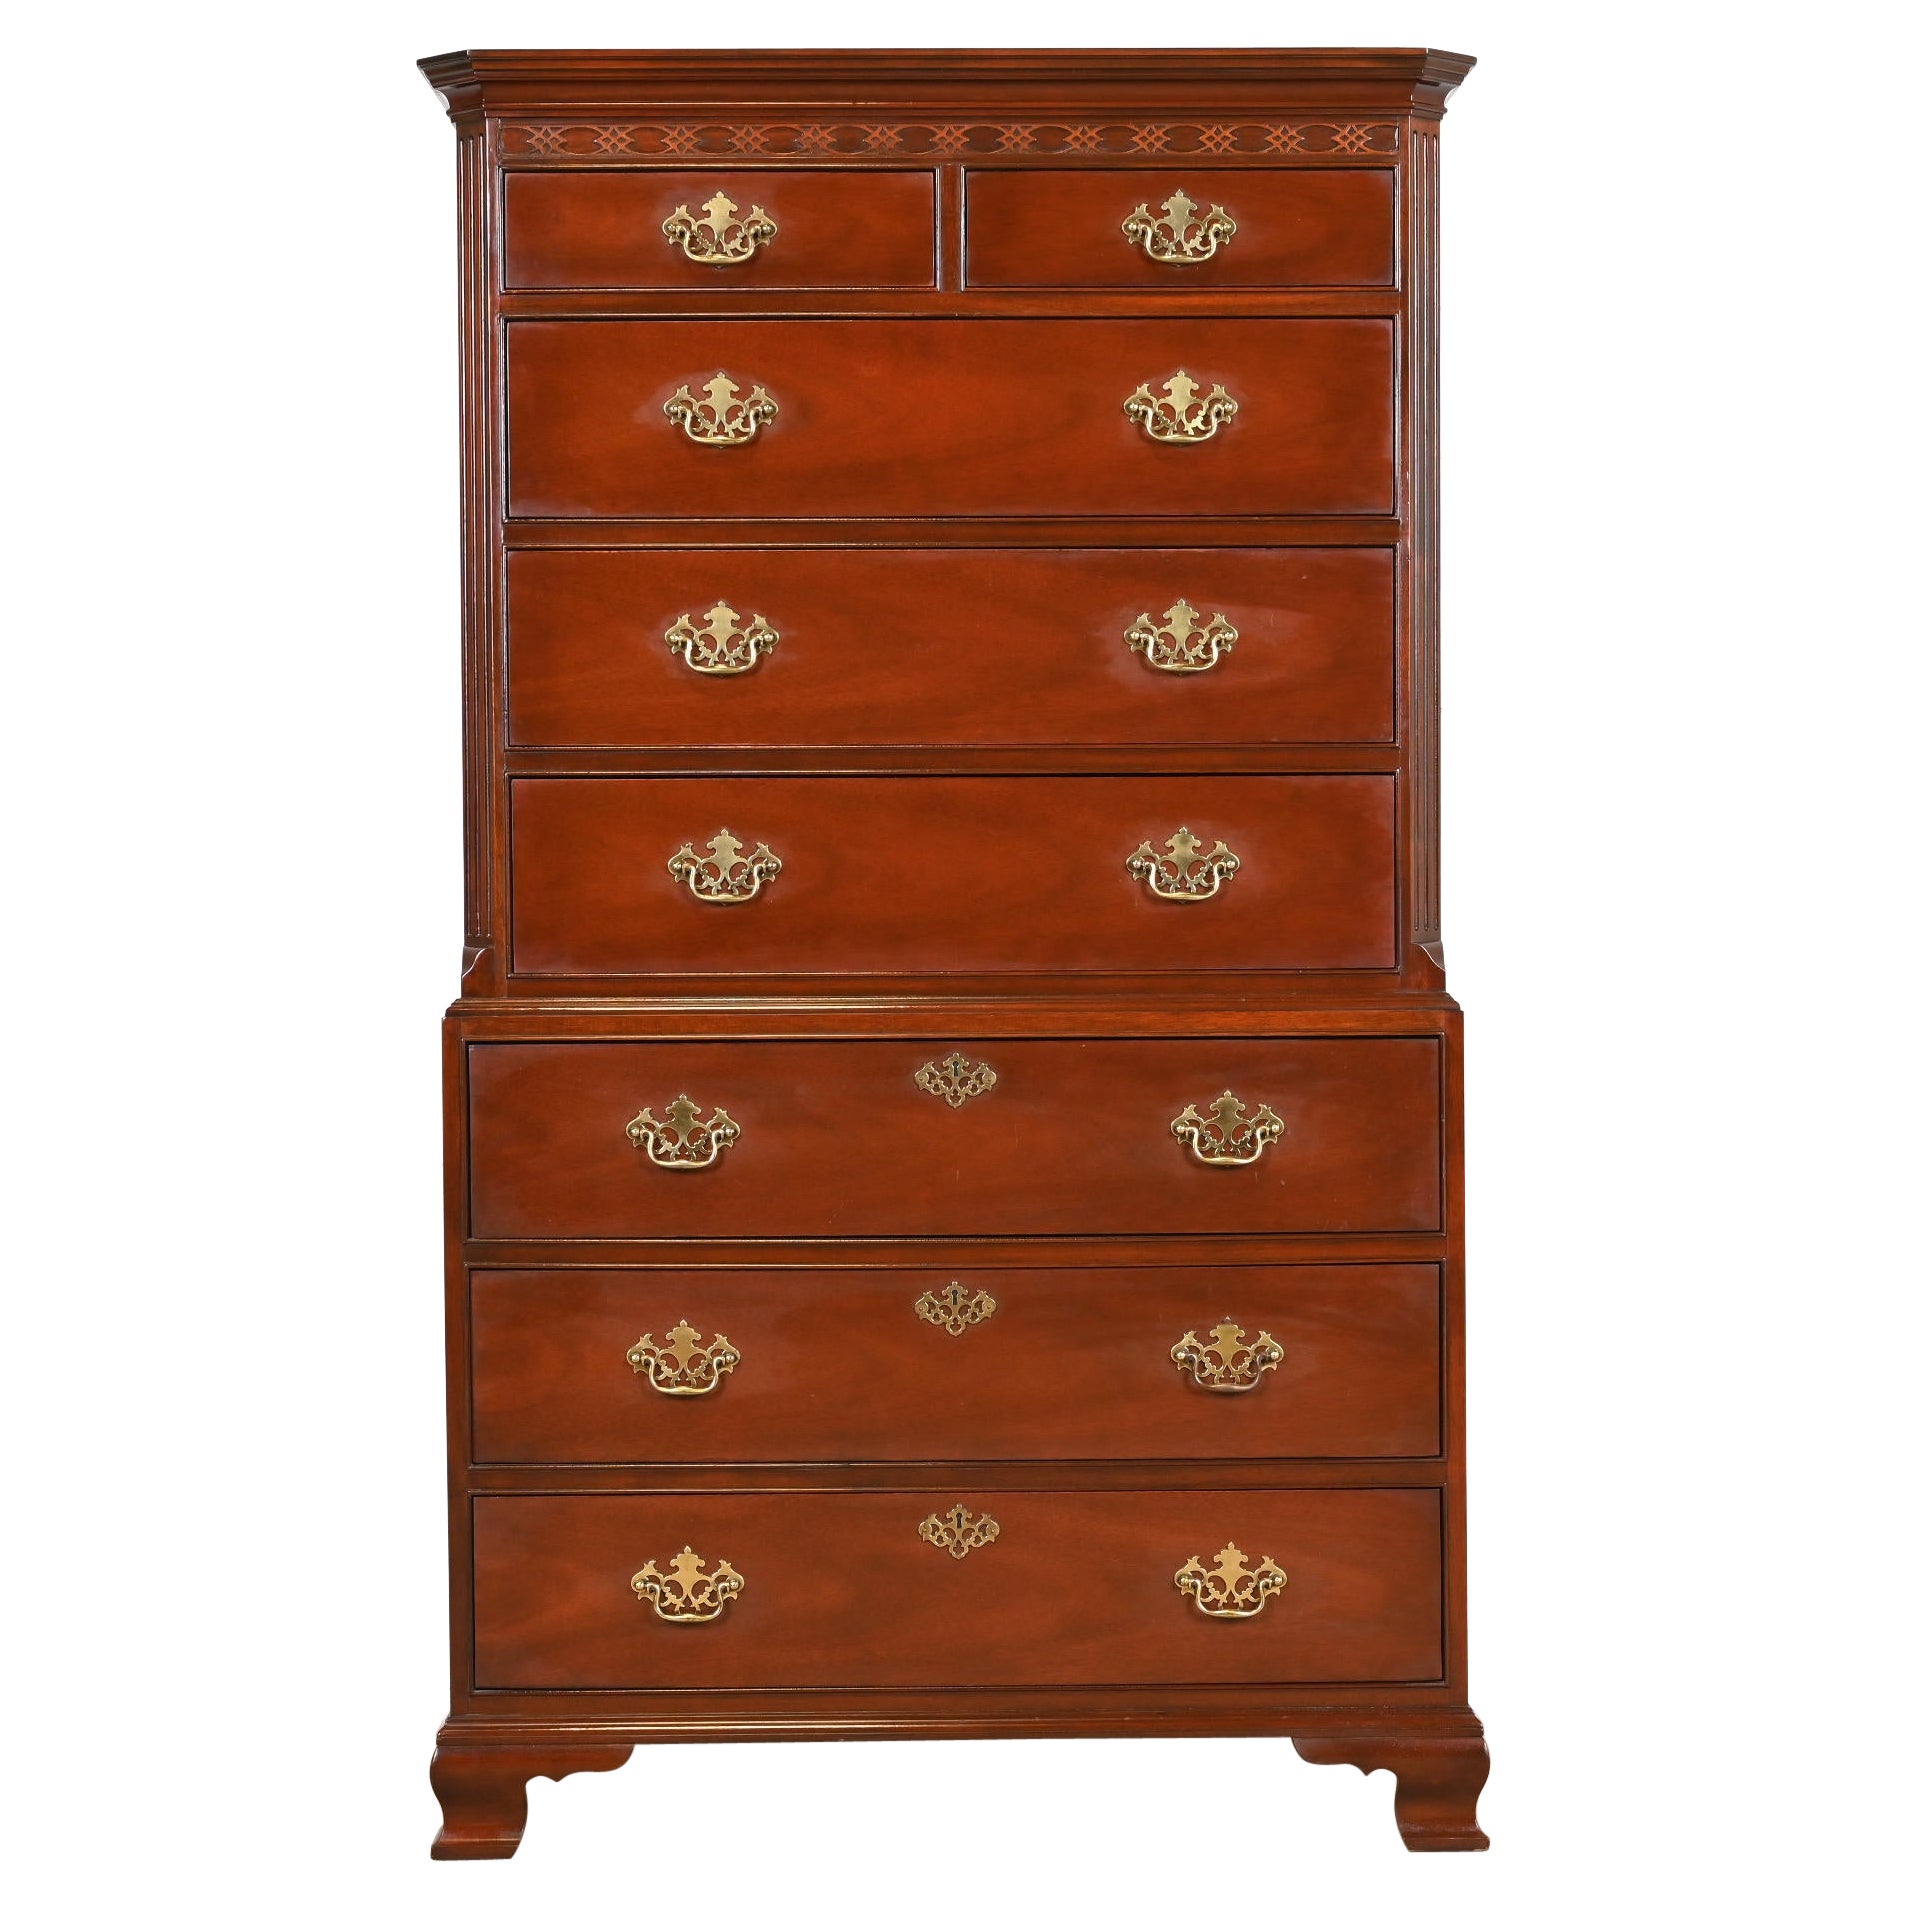 What style is a highboy dresser?